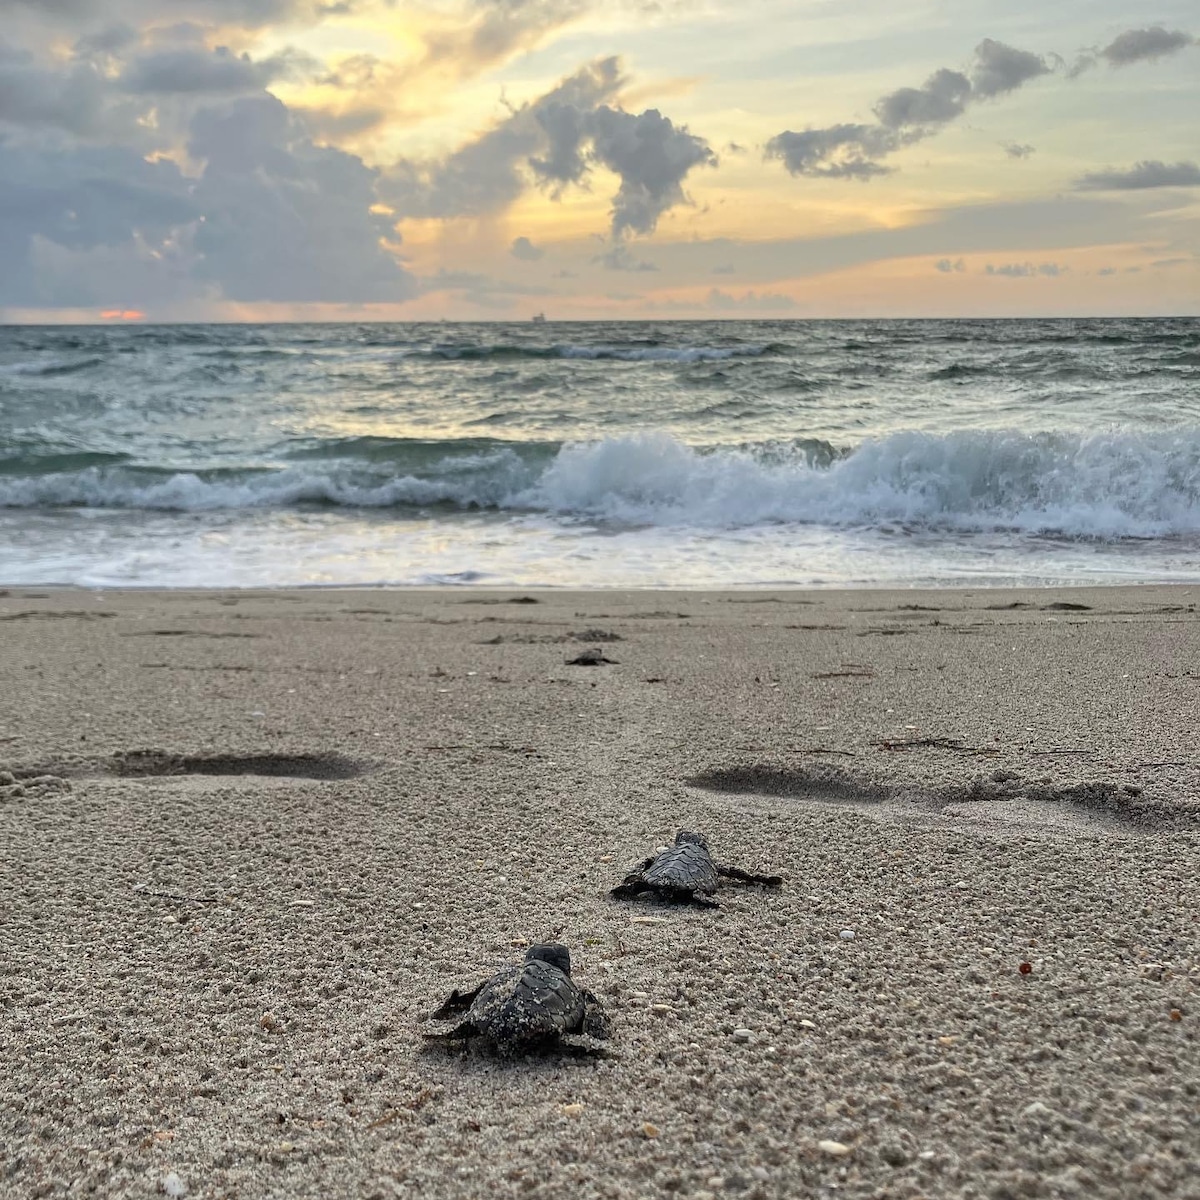 Hot ocean temperatures affect sea turtles’ development and hatching success while they nest in the sand along shorelines